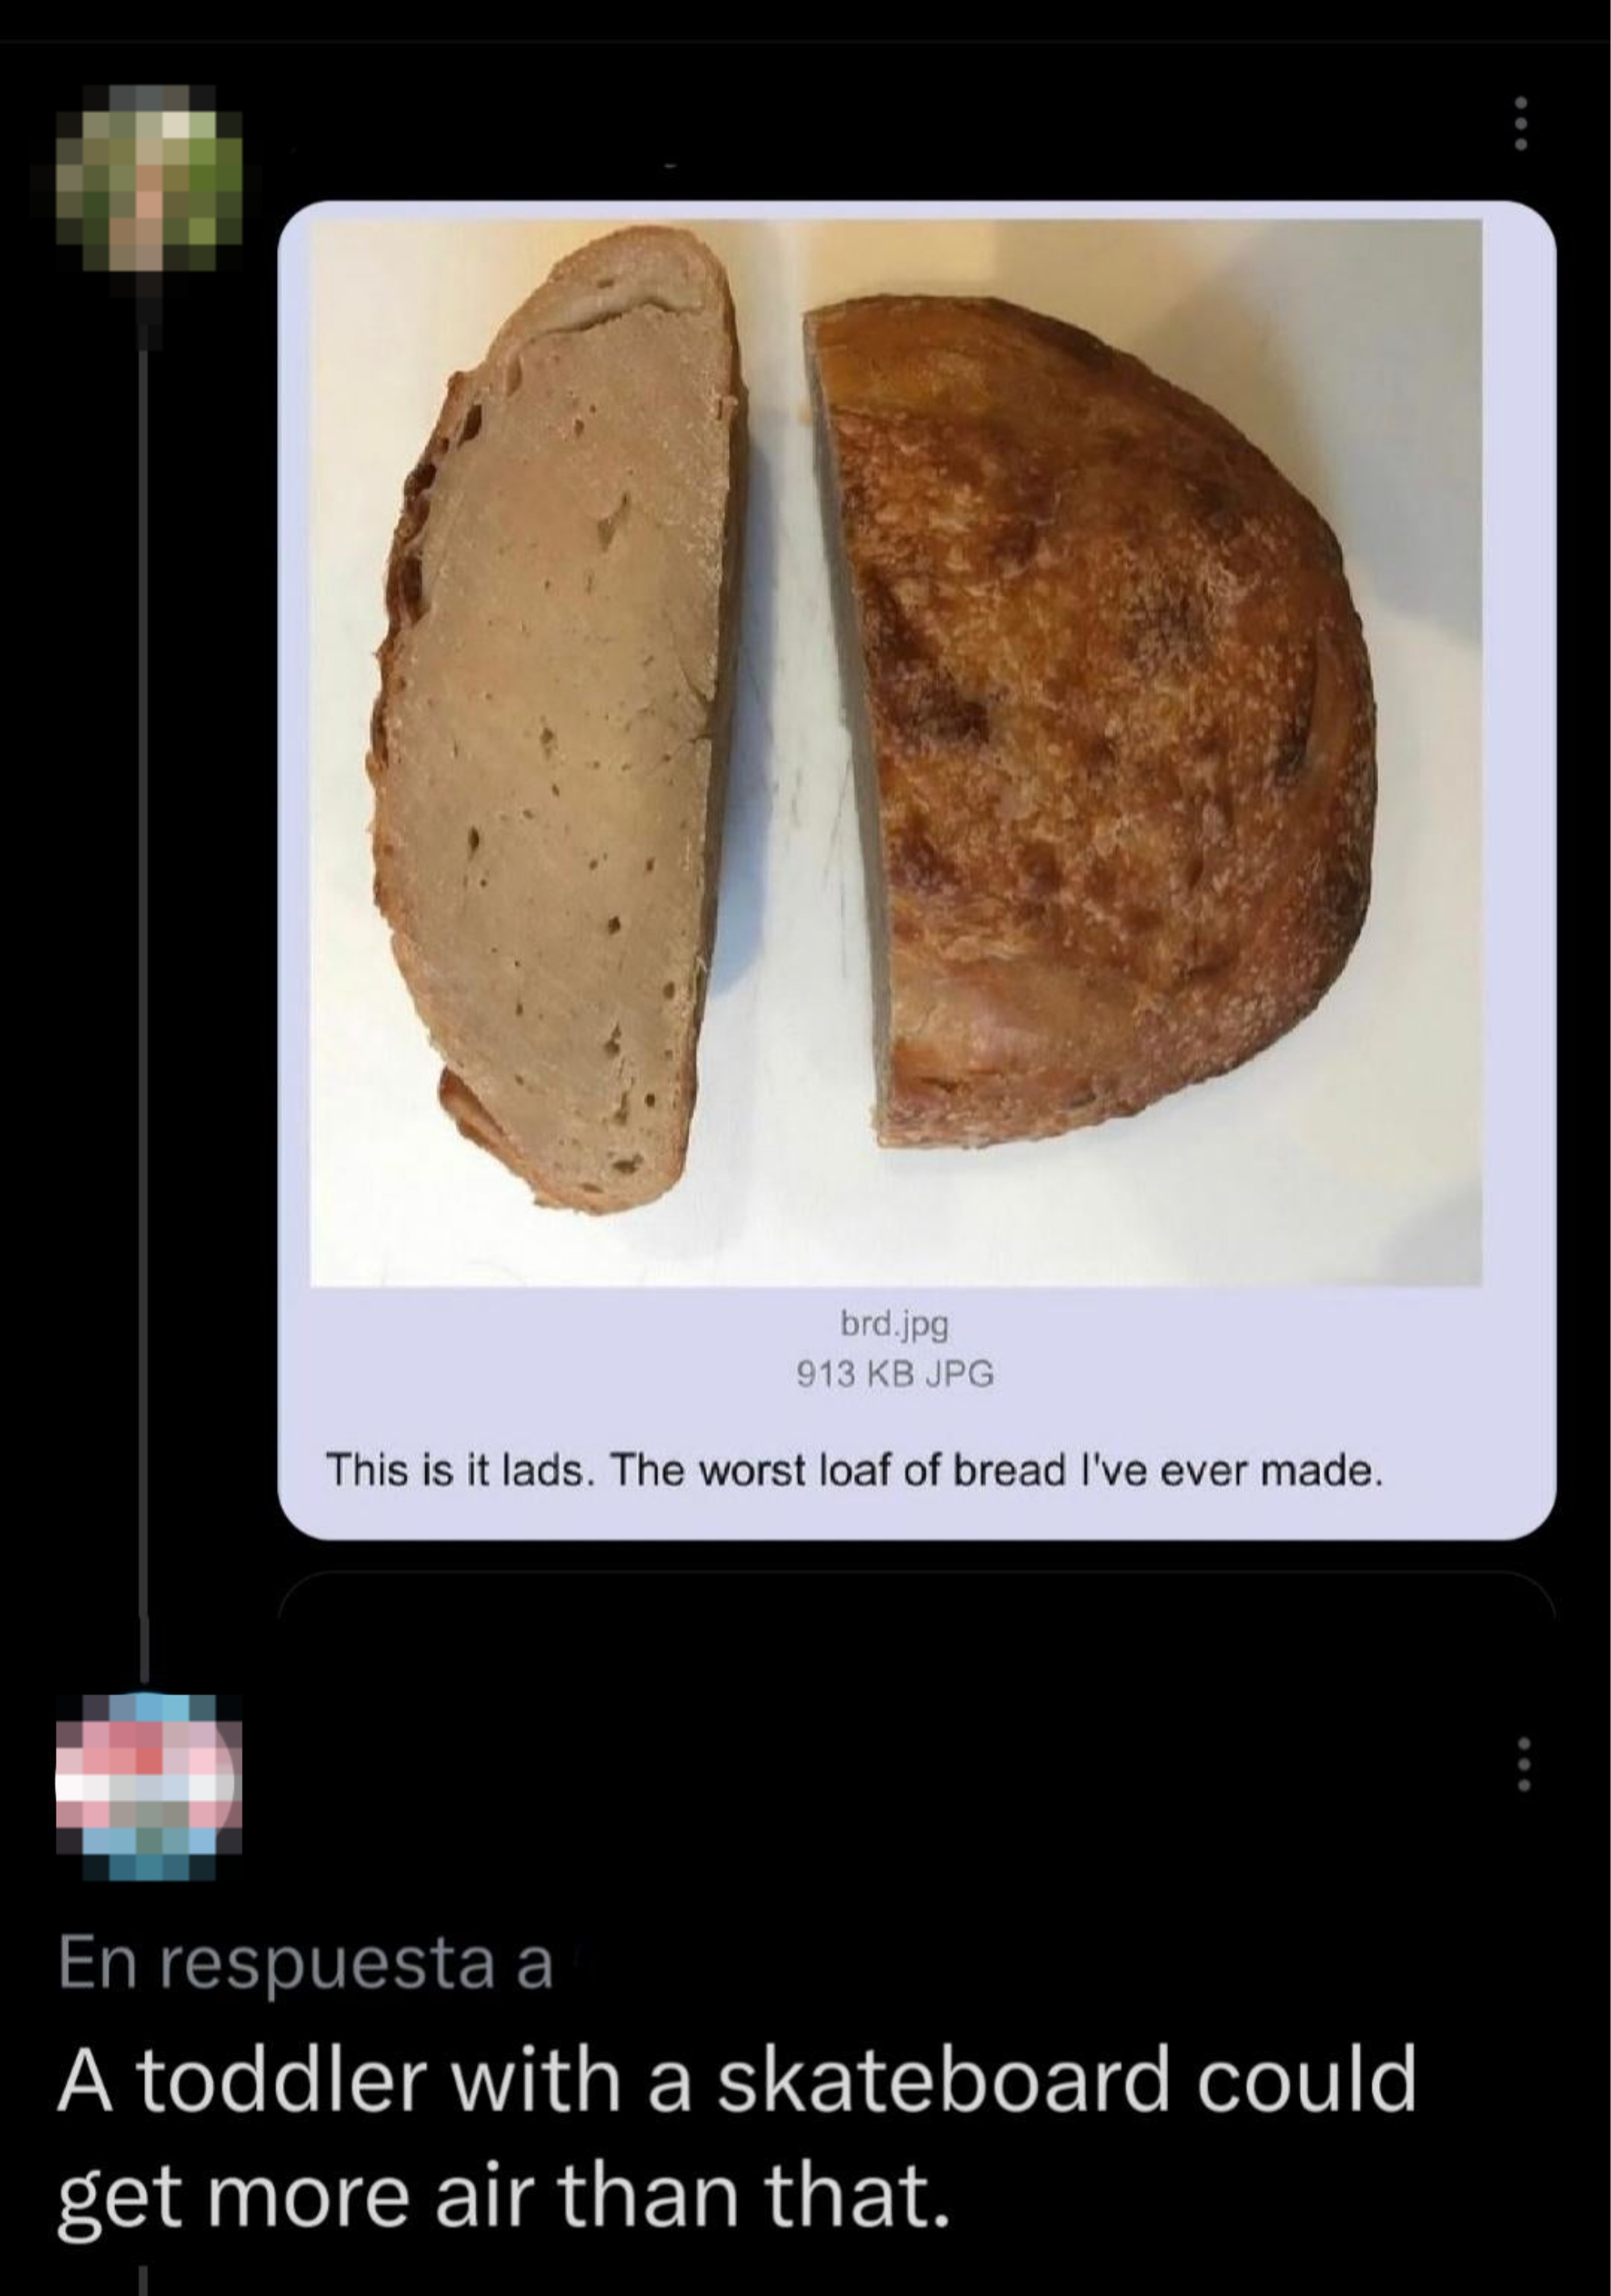 Someone posts extremely dense-looking bread with comment, &quot;This is it lads, the worst loaf of bread I&#x27;ve ever made&quot;; response: &quot;A toddler with a skateboard could get more air than that&quot;